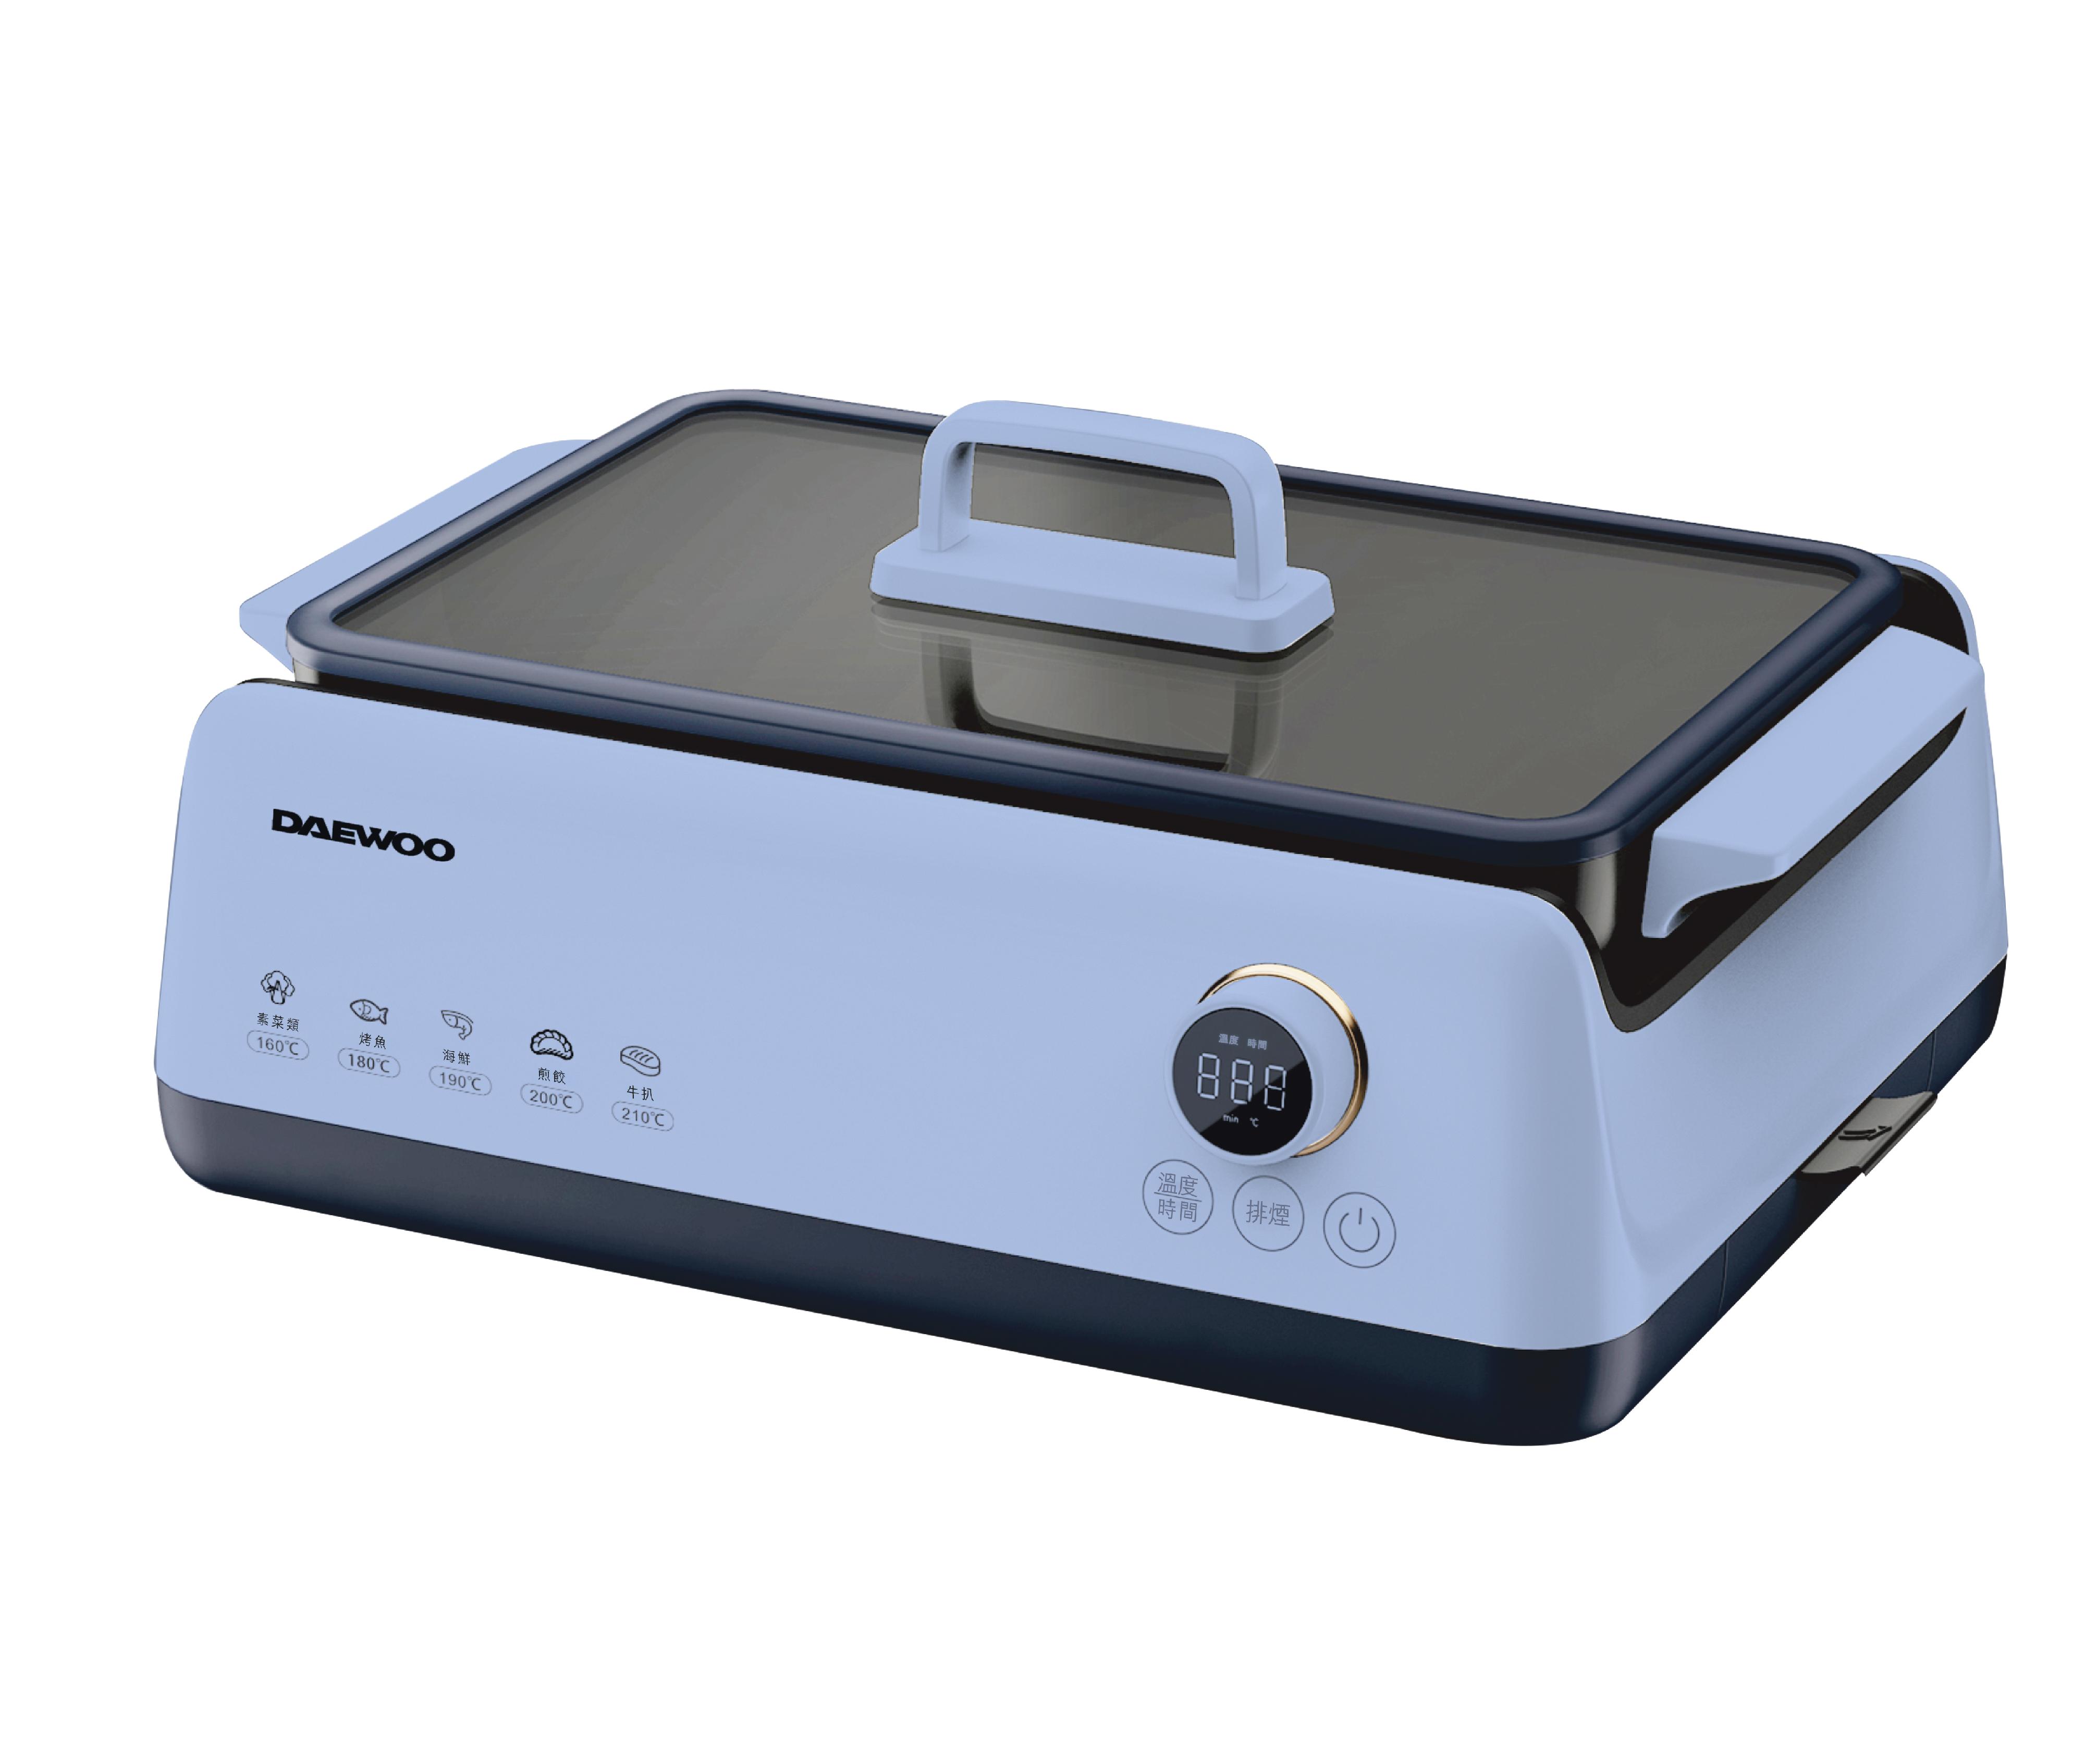 The Electrical and Mechanical Services Department today (March 15) urged the public to stop using Daewoo electric grills with the model number of SG-2717C and a blue enclosure. Photo shows the electric grill.